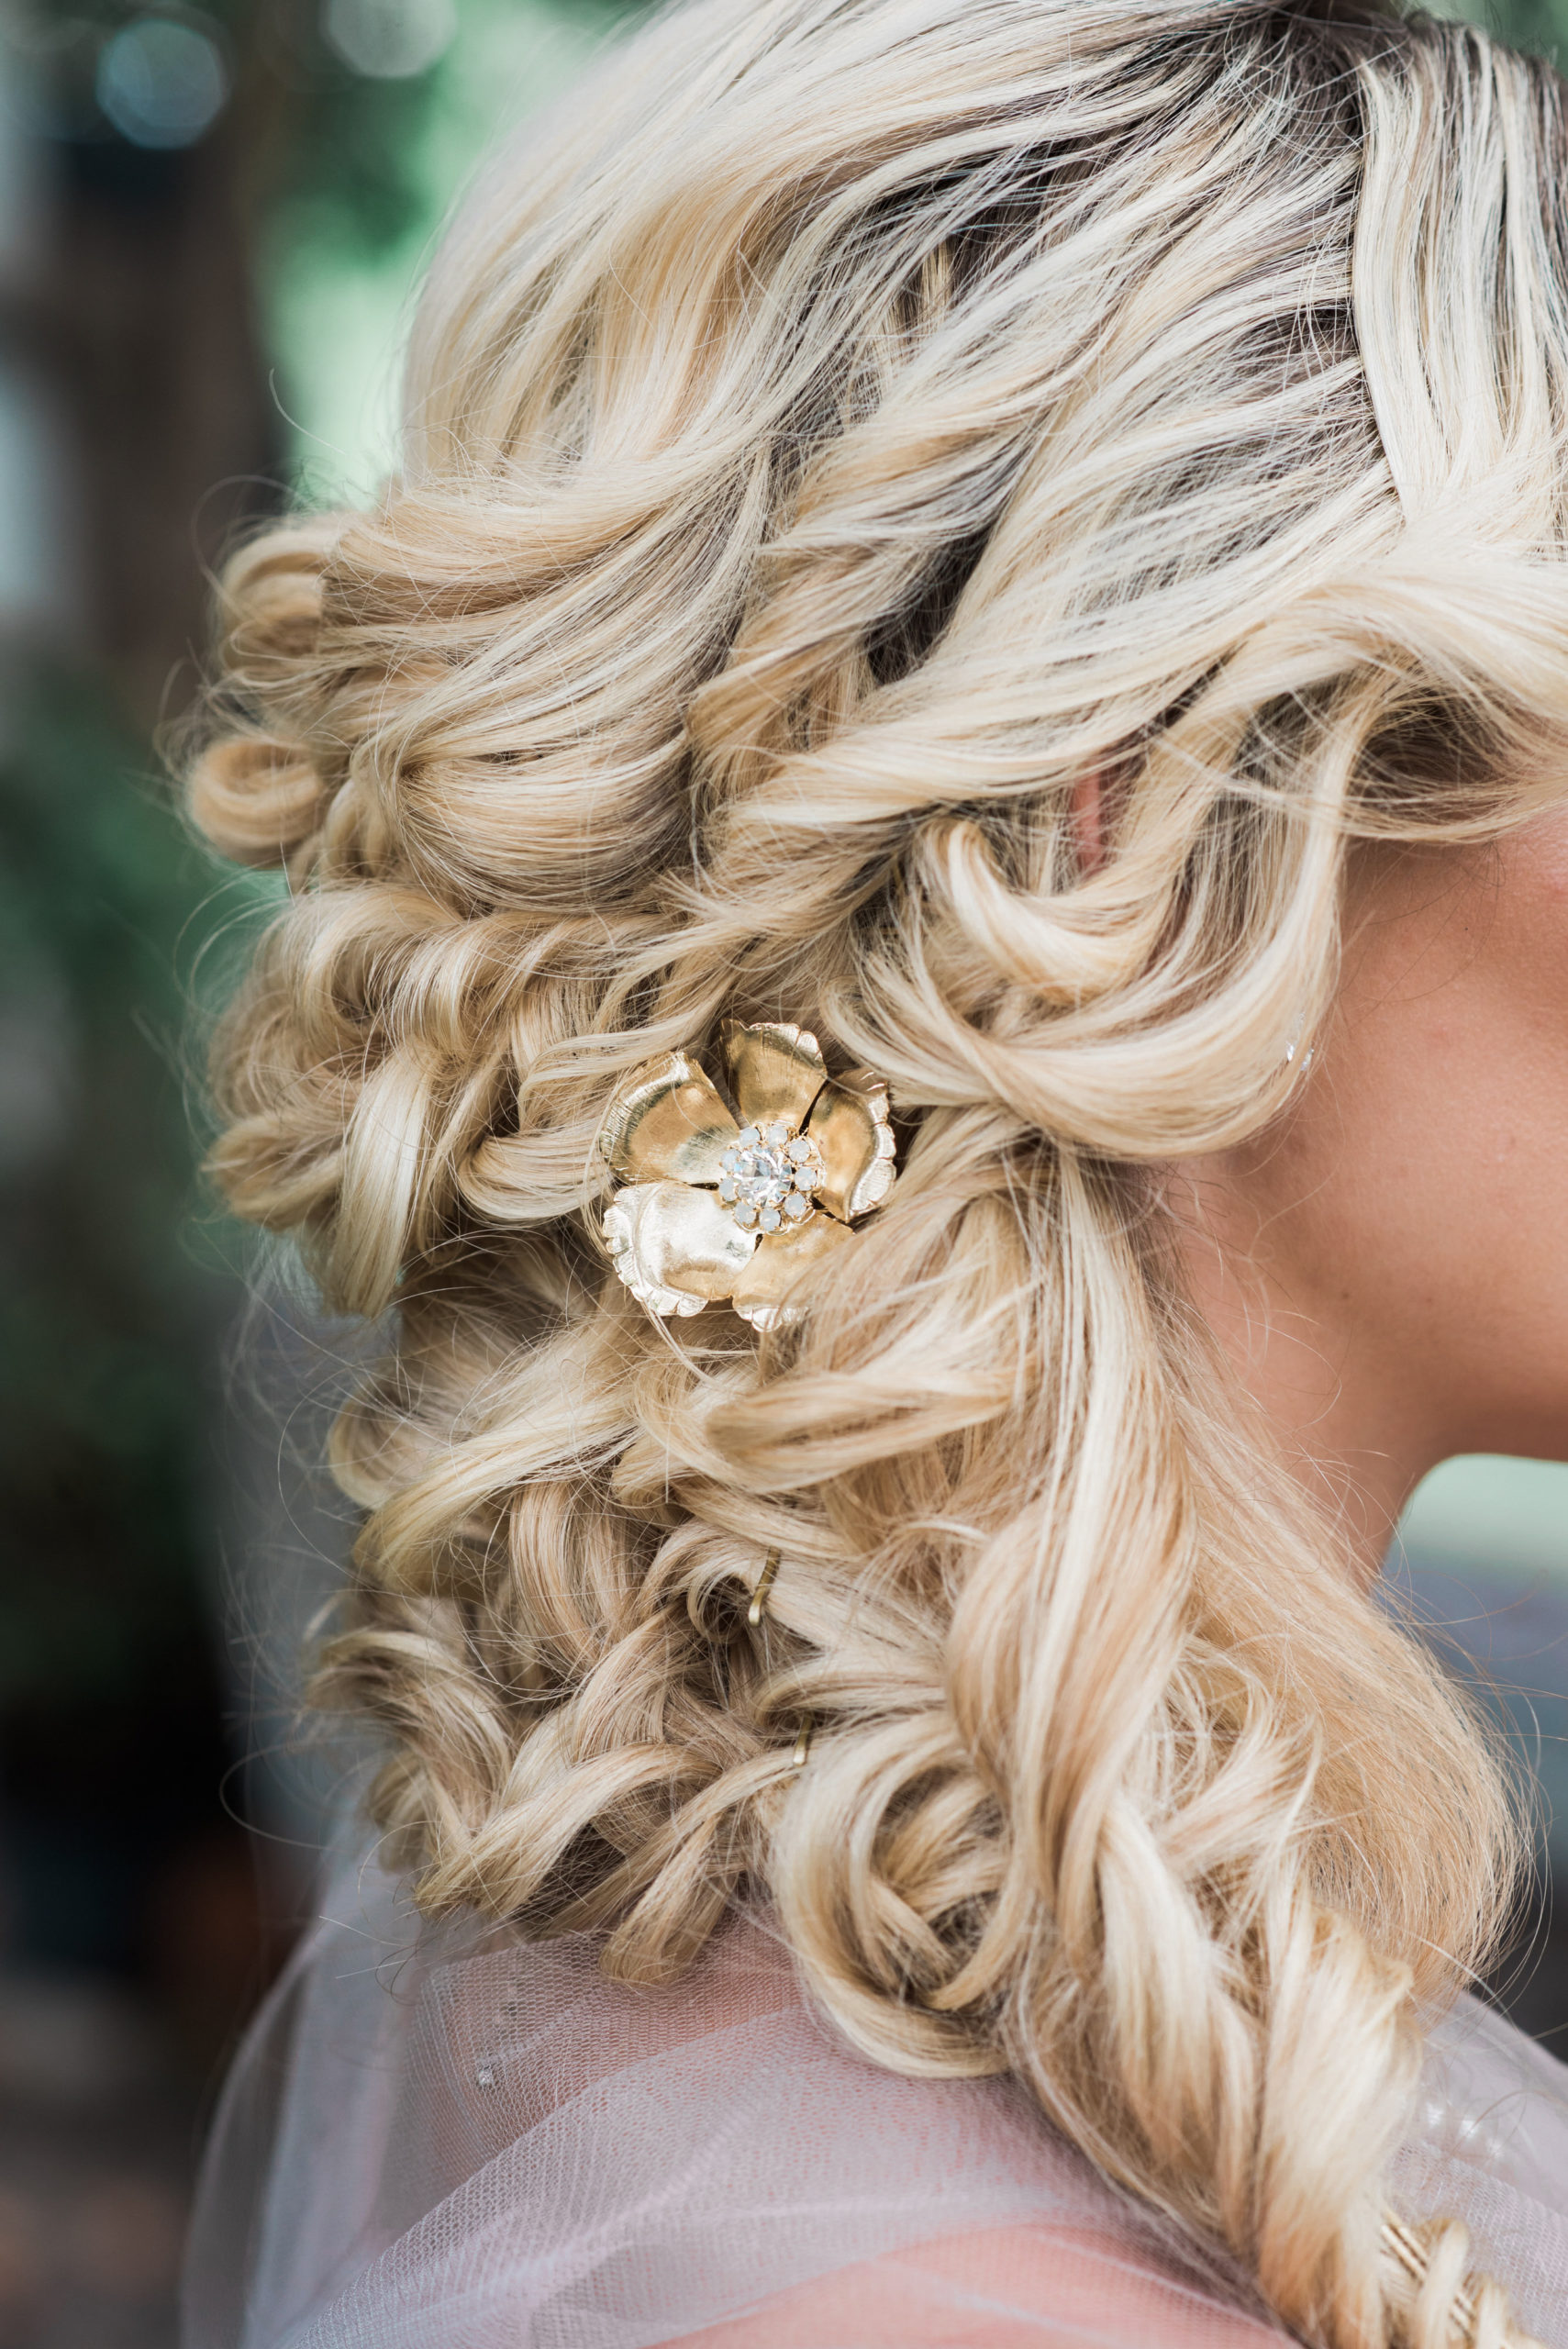 The bride's wedding hair style was tight overlapping curls off to the side, while her face was framed with loose pieces | wedding hair, wedding updo, curled hair